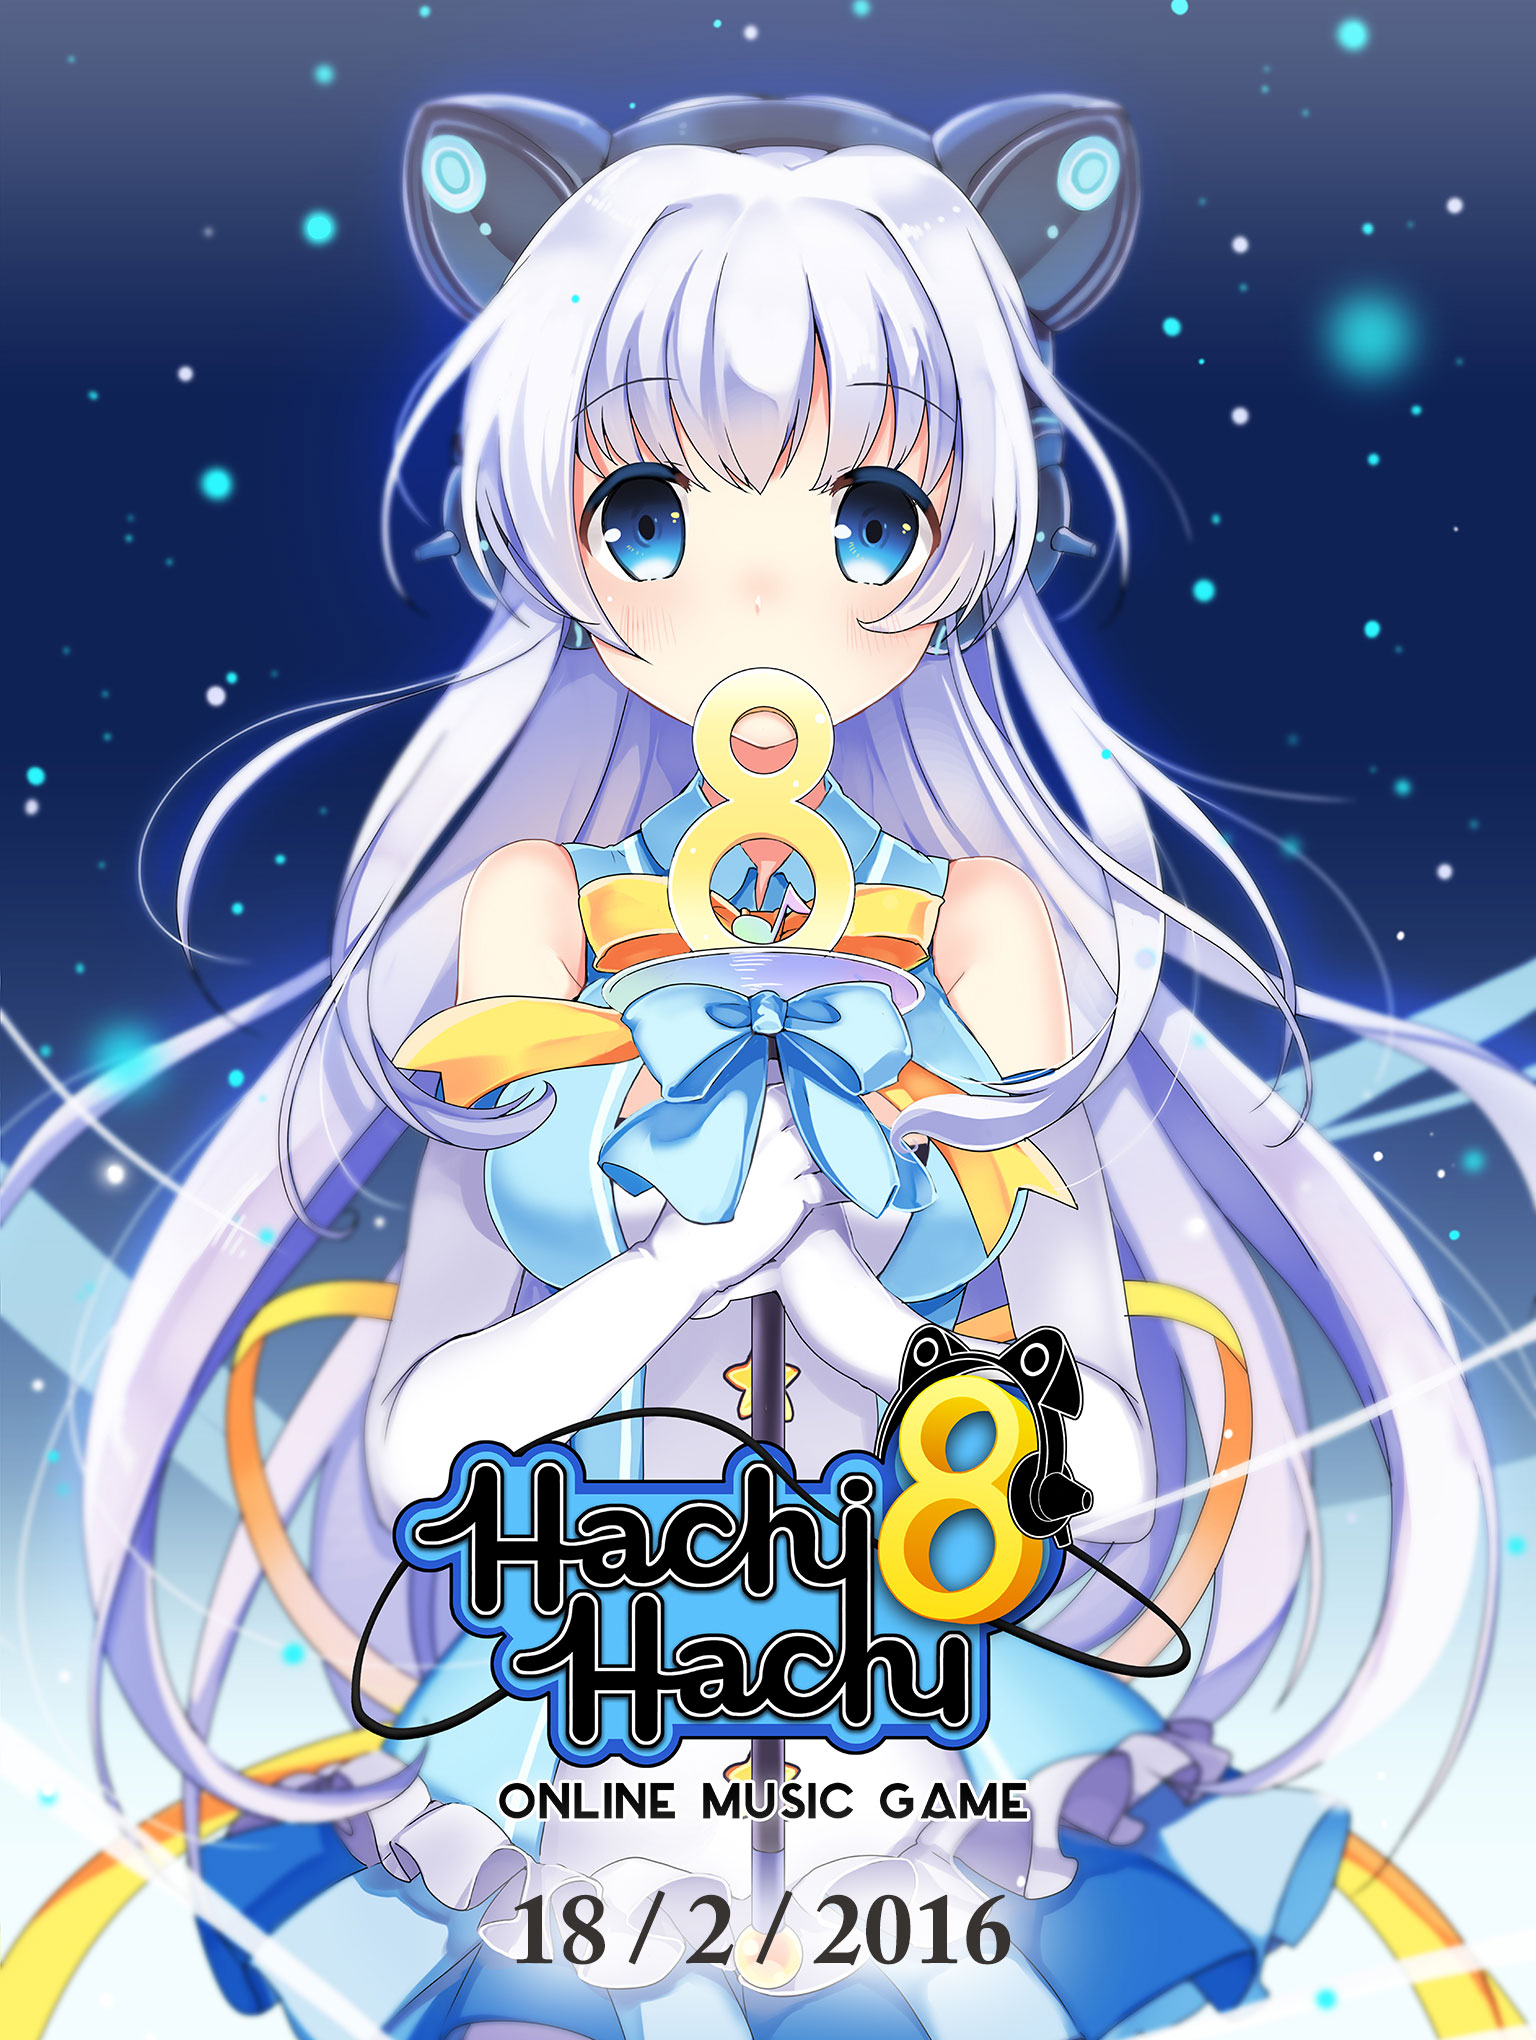 Hachi Hachi iOS, iPad, Android, AndroidTab game - Mod DB